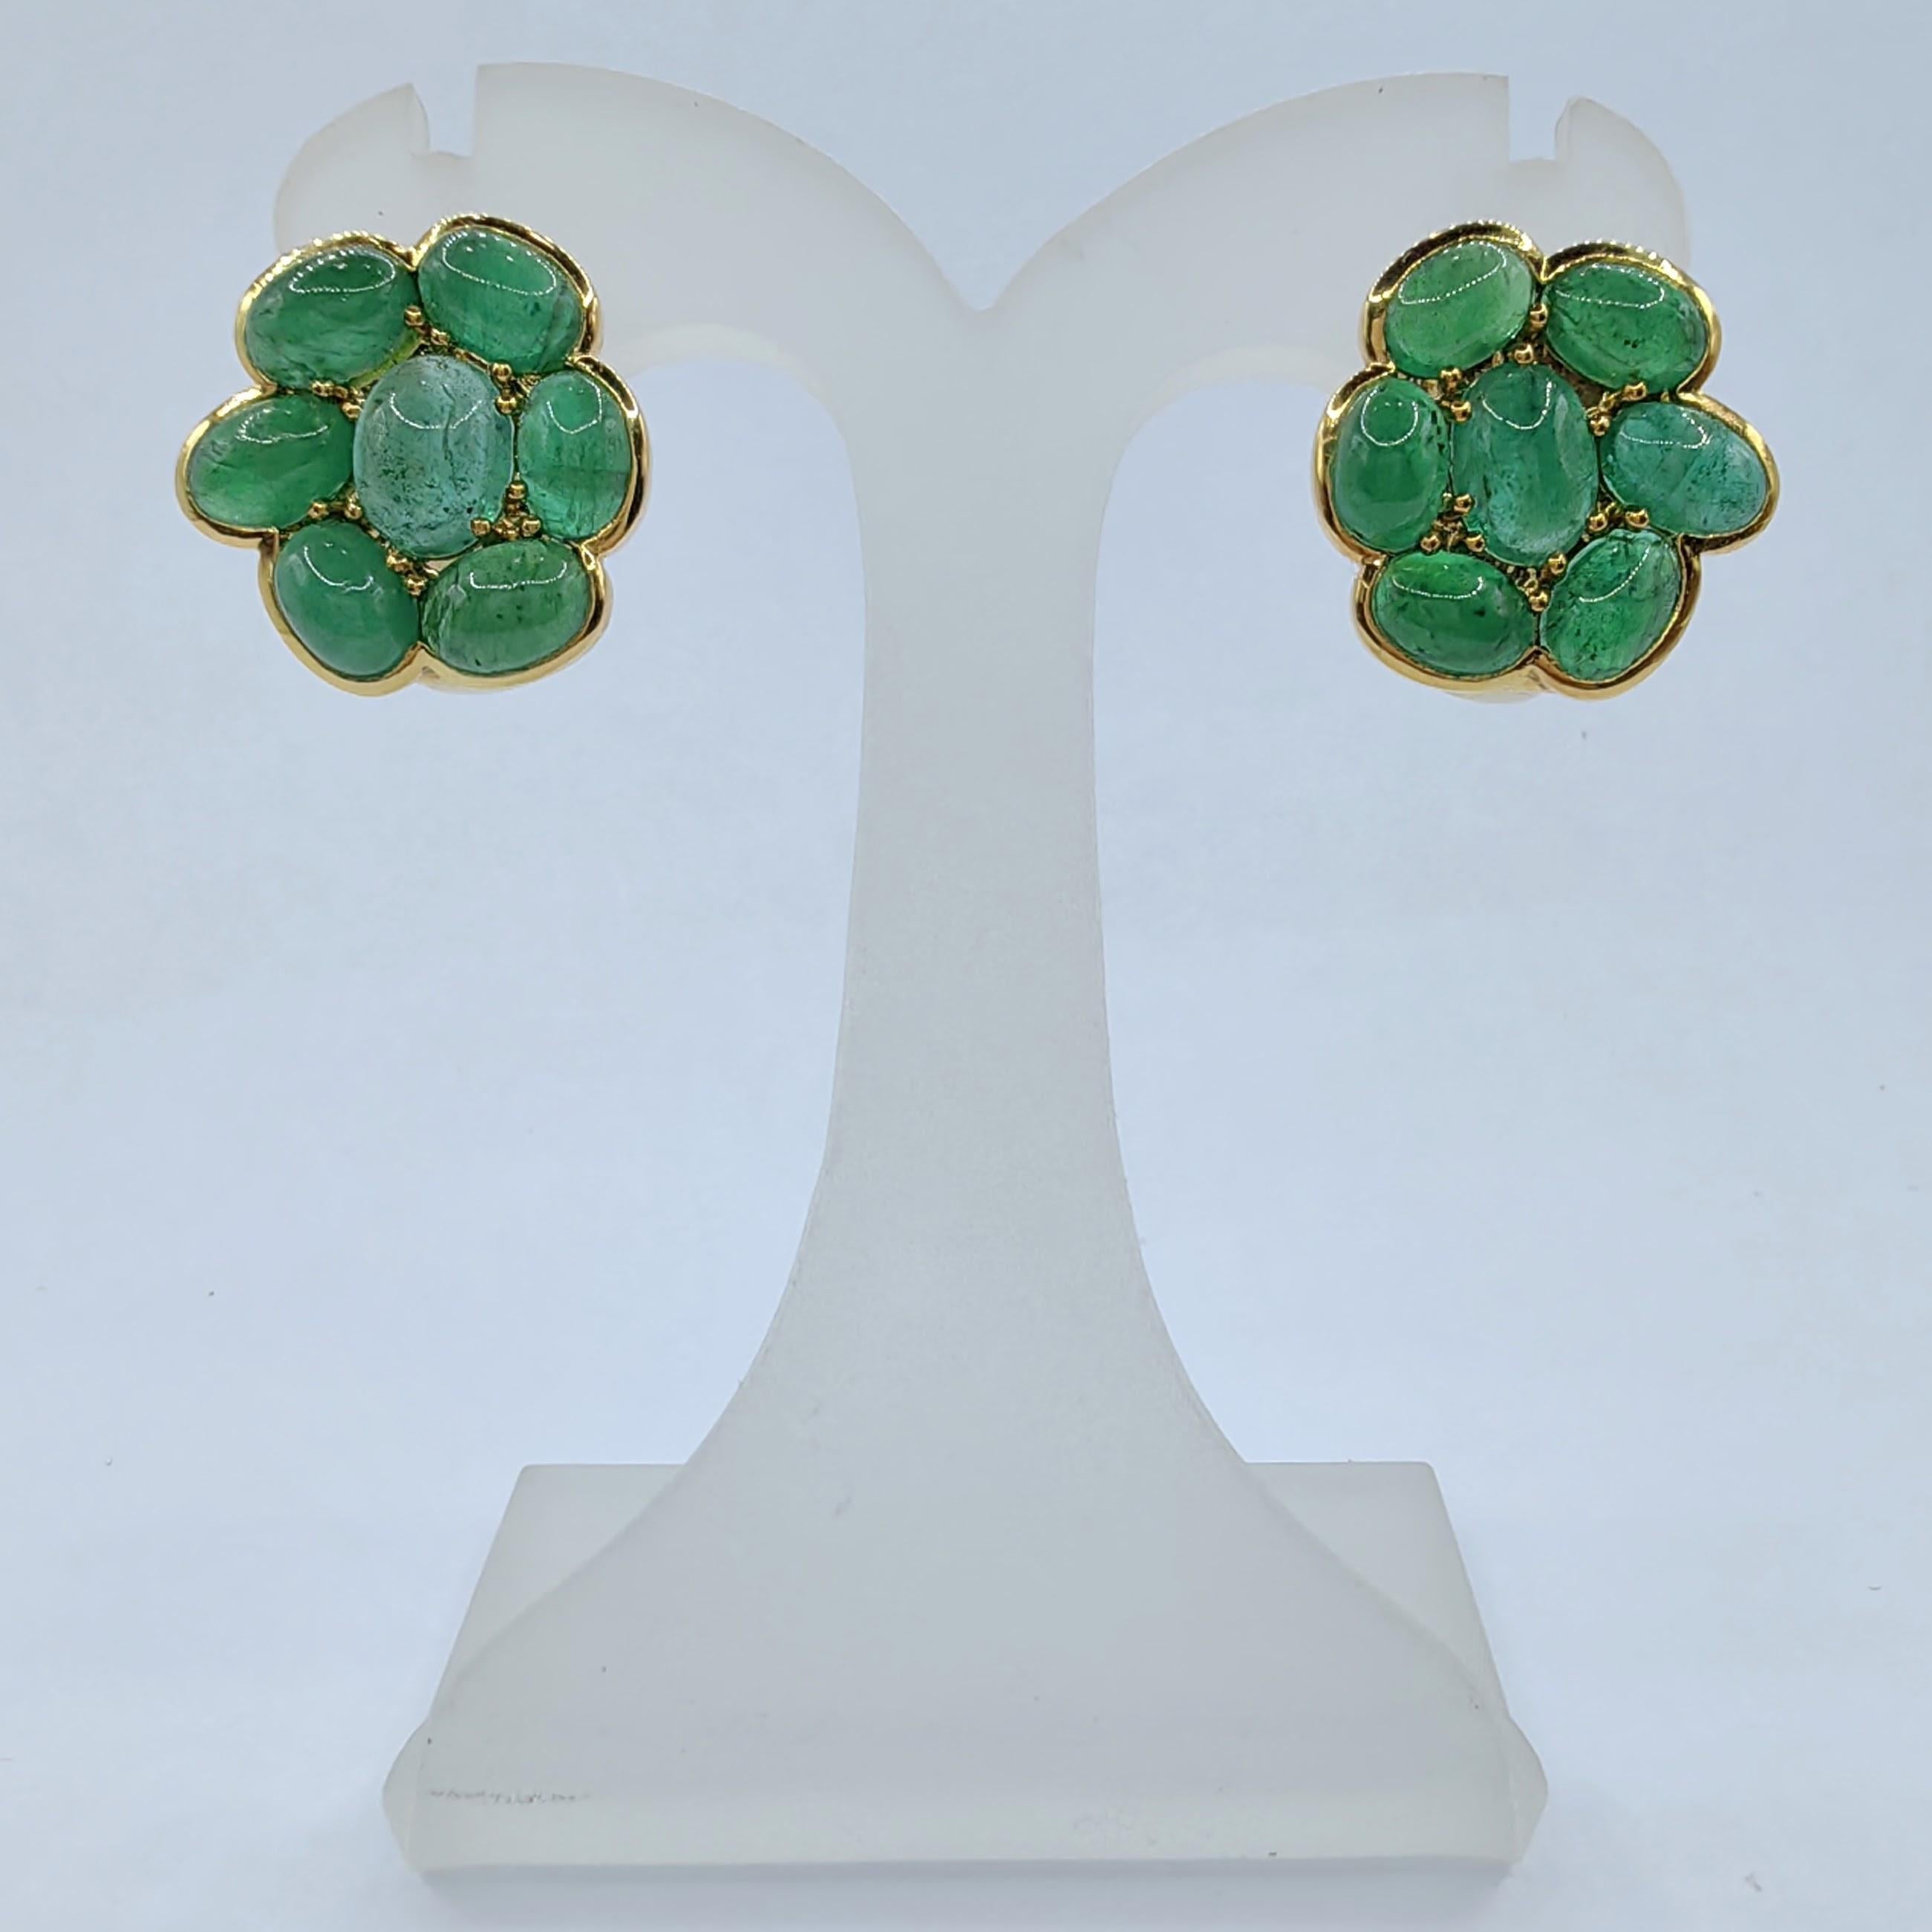 Contemporary 8 Carat Cabochon Emerald Cluster Flower Earrings in 18K Yellow Gold For Sale